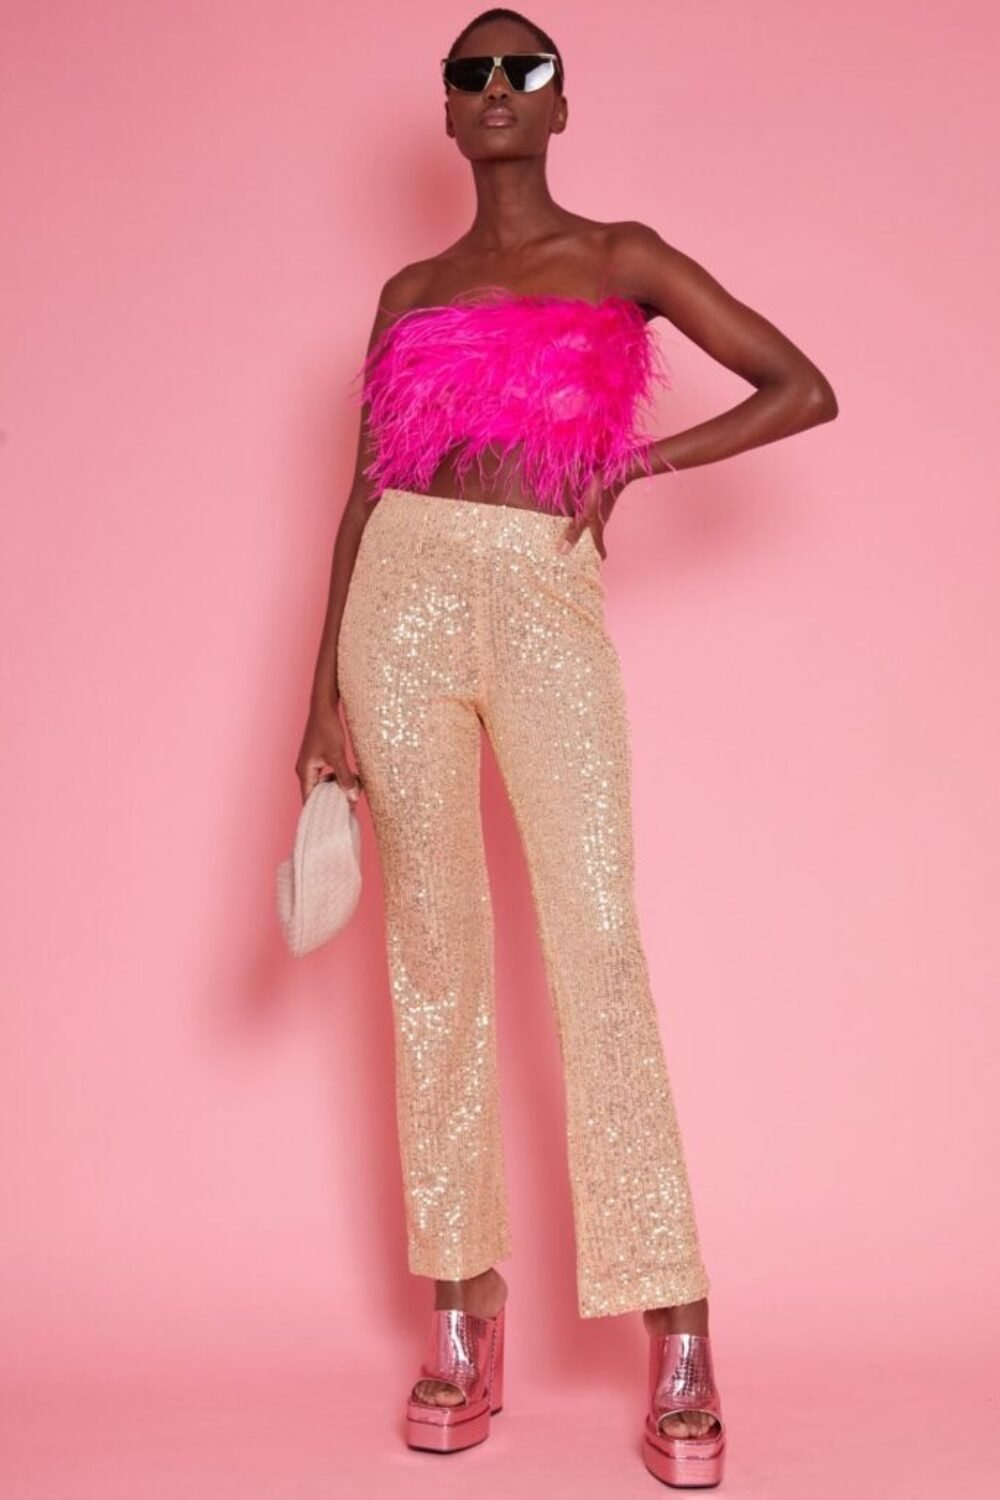 Shop Gold Lightweight Sequin Trousers and women's luxury and designer clothes at www.lux-apparel.co.uk